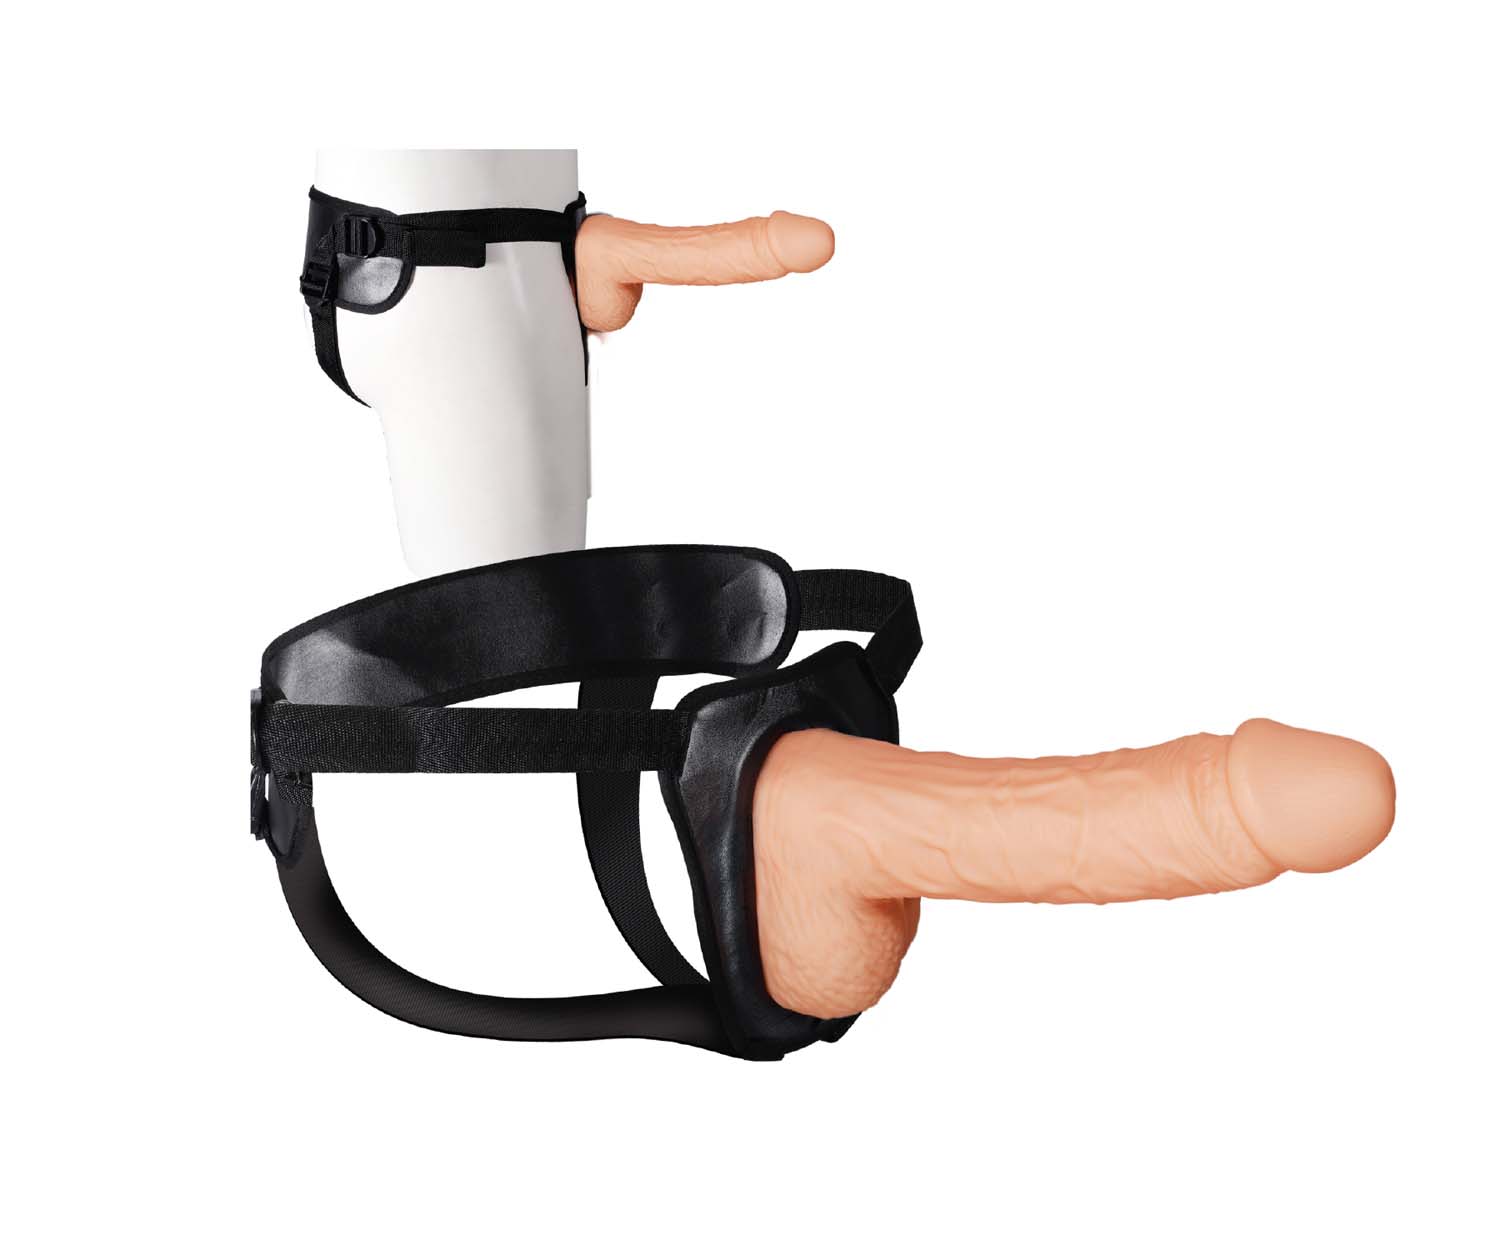 ERECTION ASSISTANT HOLLOW STRAP-ON 8.5IN WHITE - NW30551